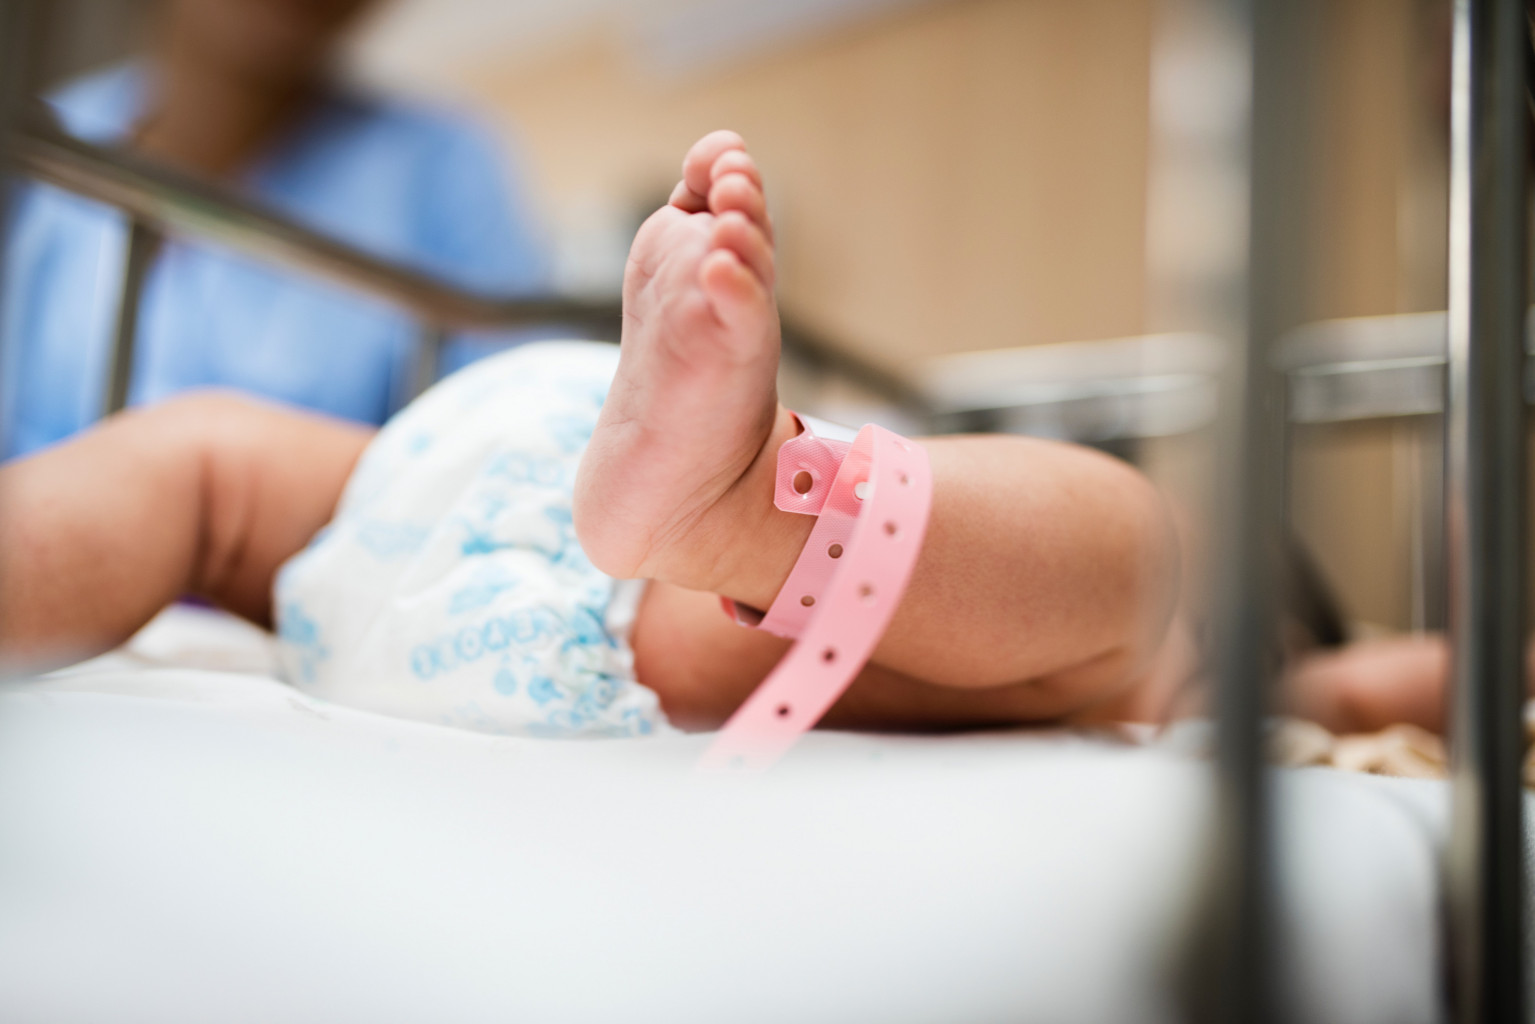 Birth injury lawyers in Chicago